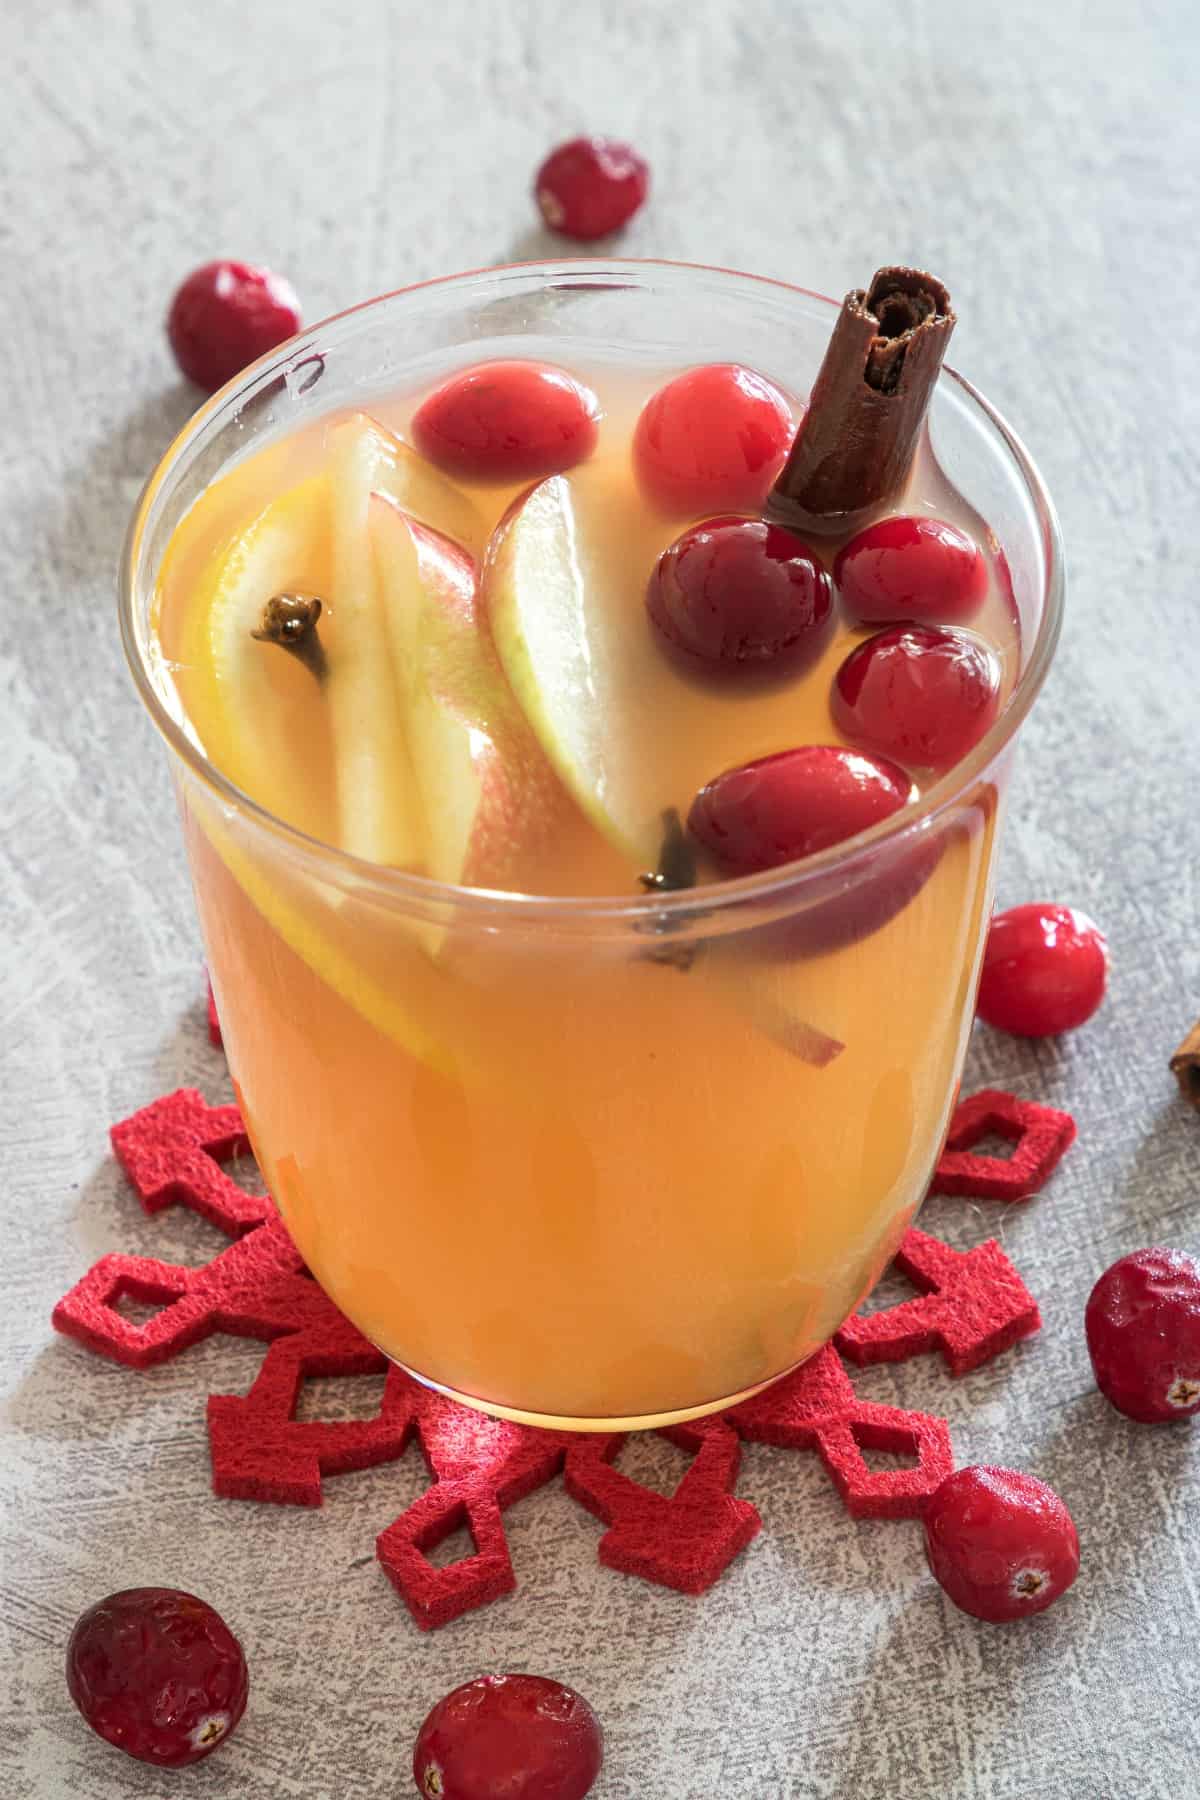 Clear glass with homemade apple cider, apples, cranberries, and a cinnamon stick.